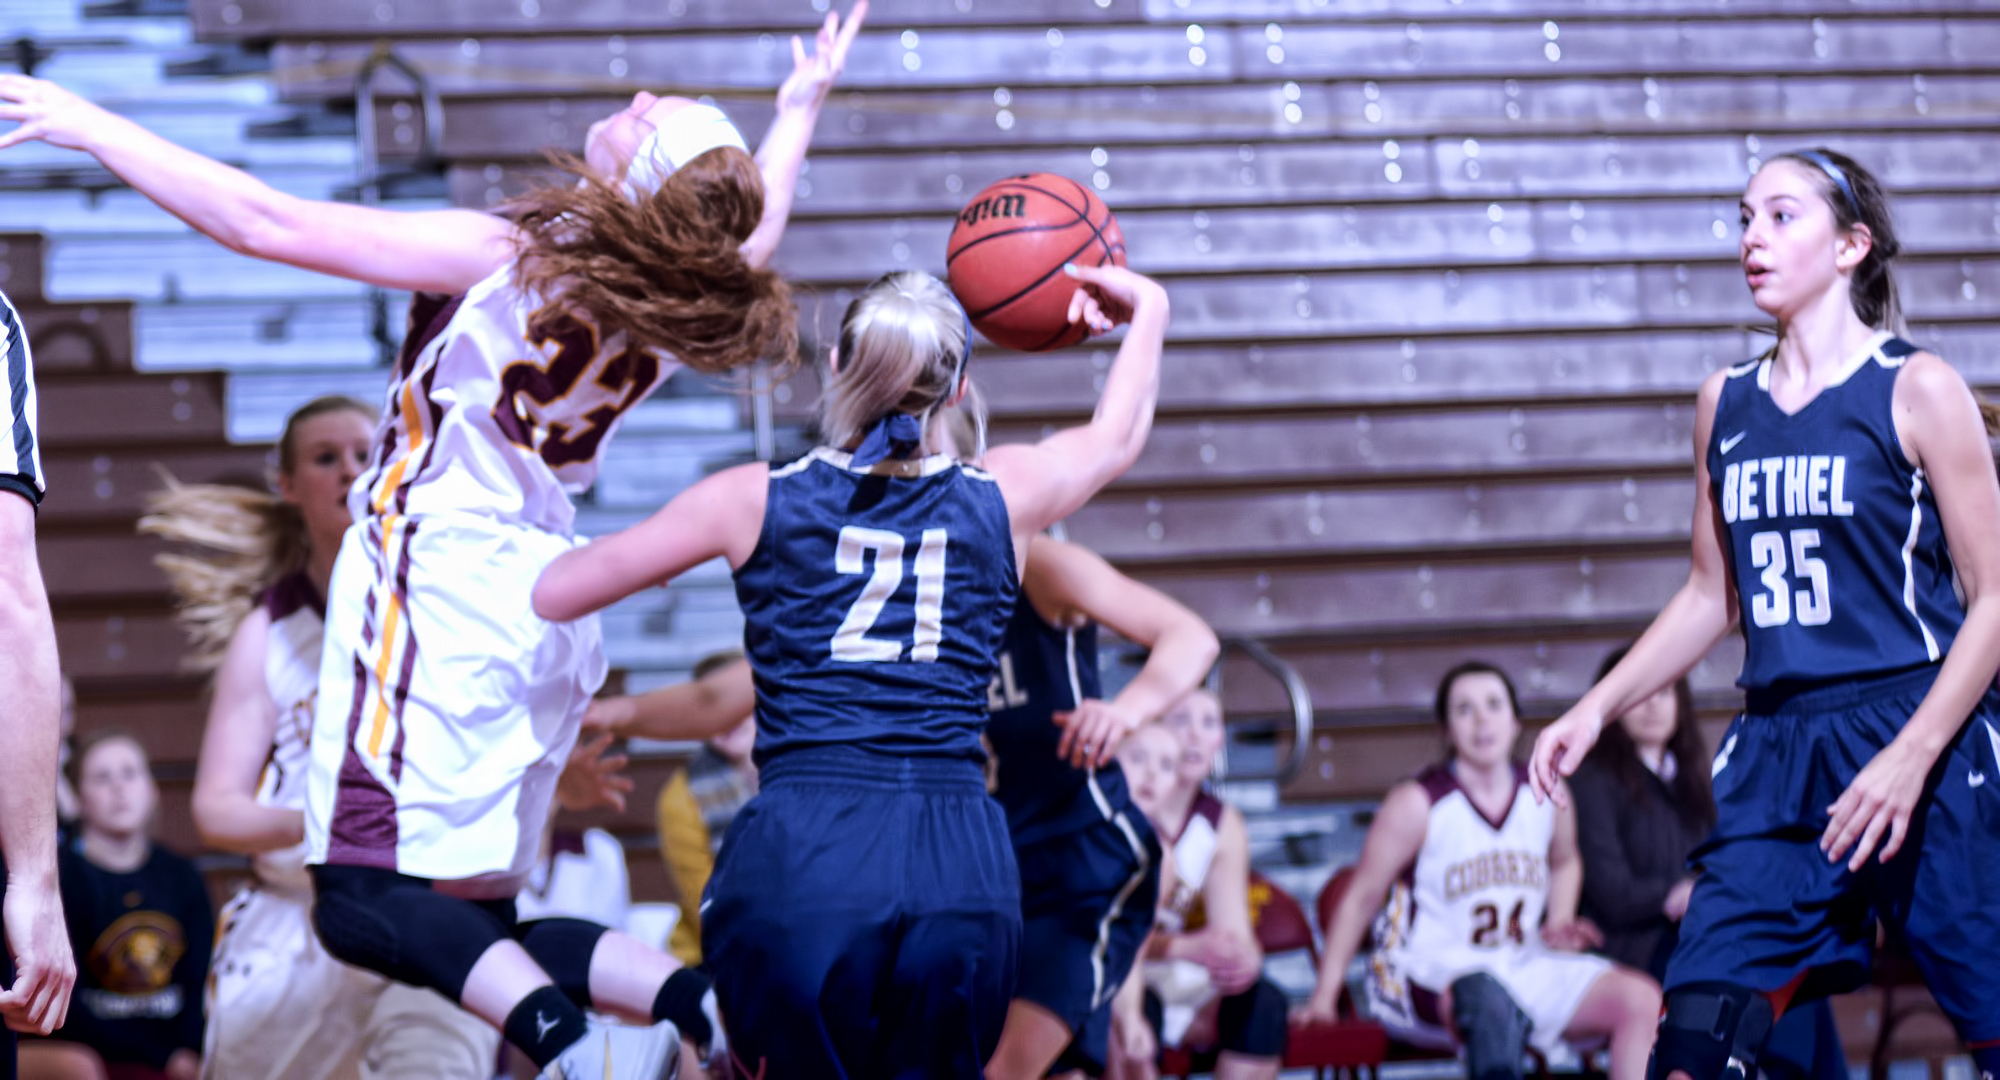 Freshman Rachel Hoernemann goes for a rebound in the second half of the Cobbers' game against Bethel. She had a career-high seven points.